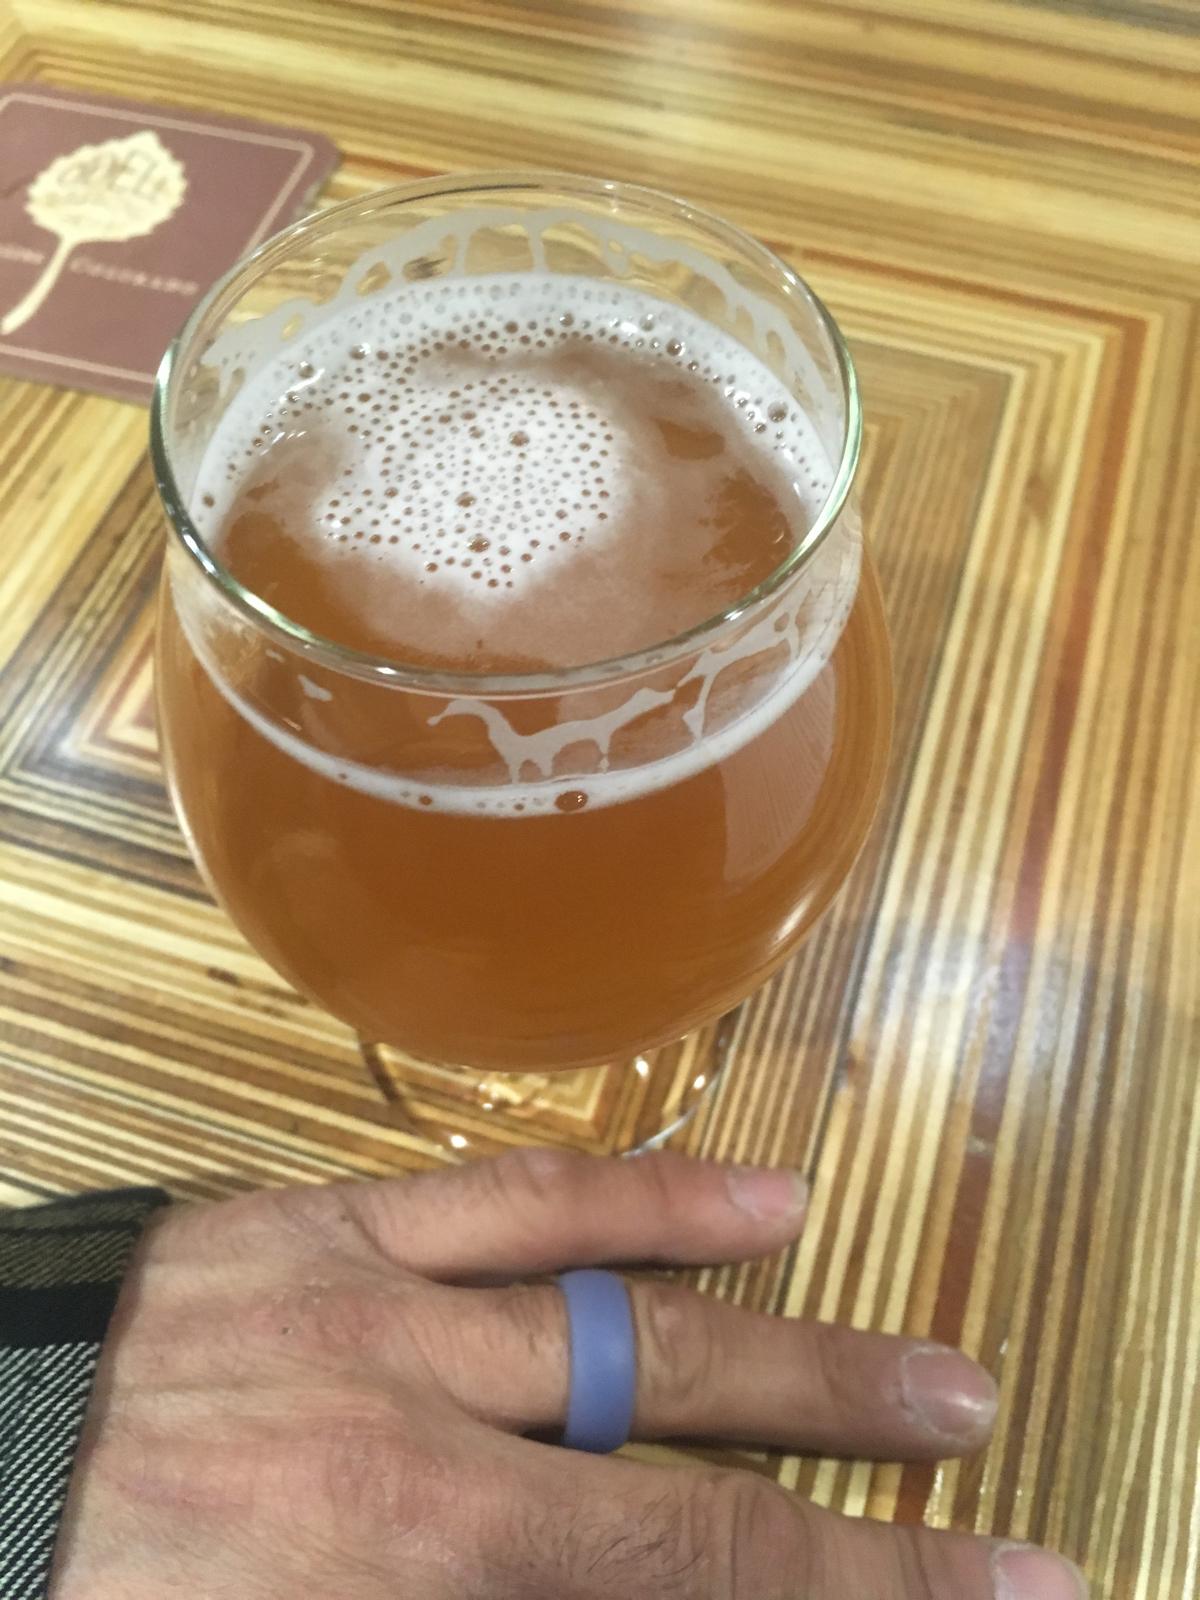 Voodoo Ranger Passion Fruit Imperial IPA